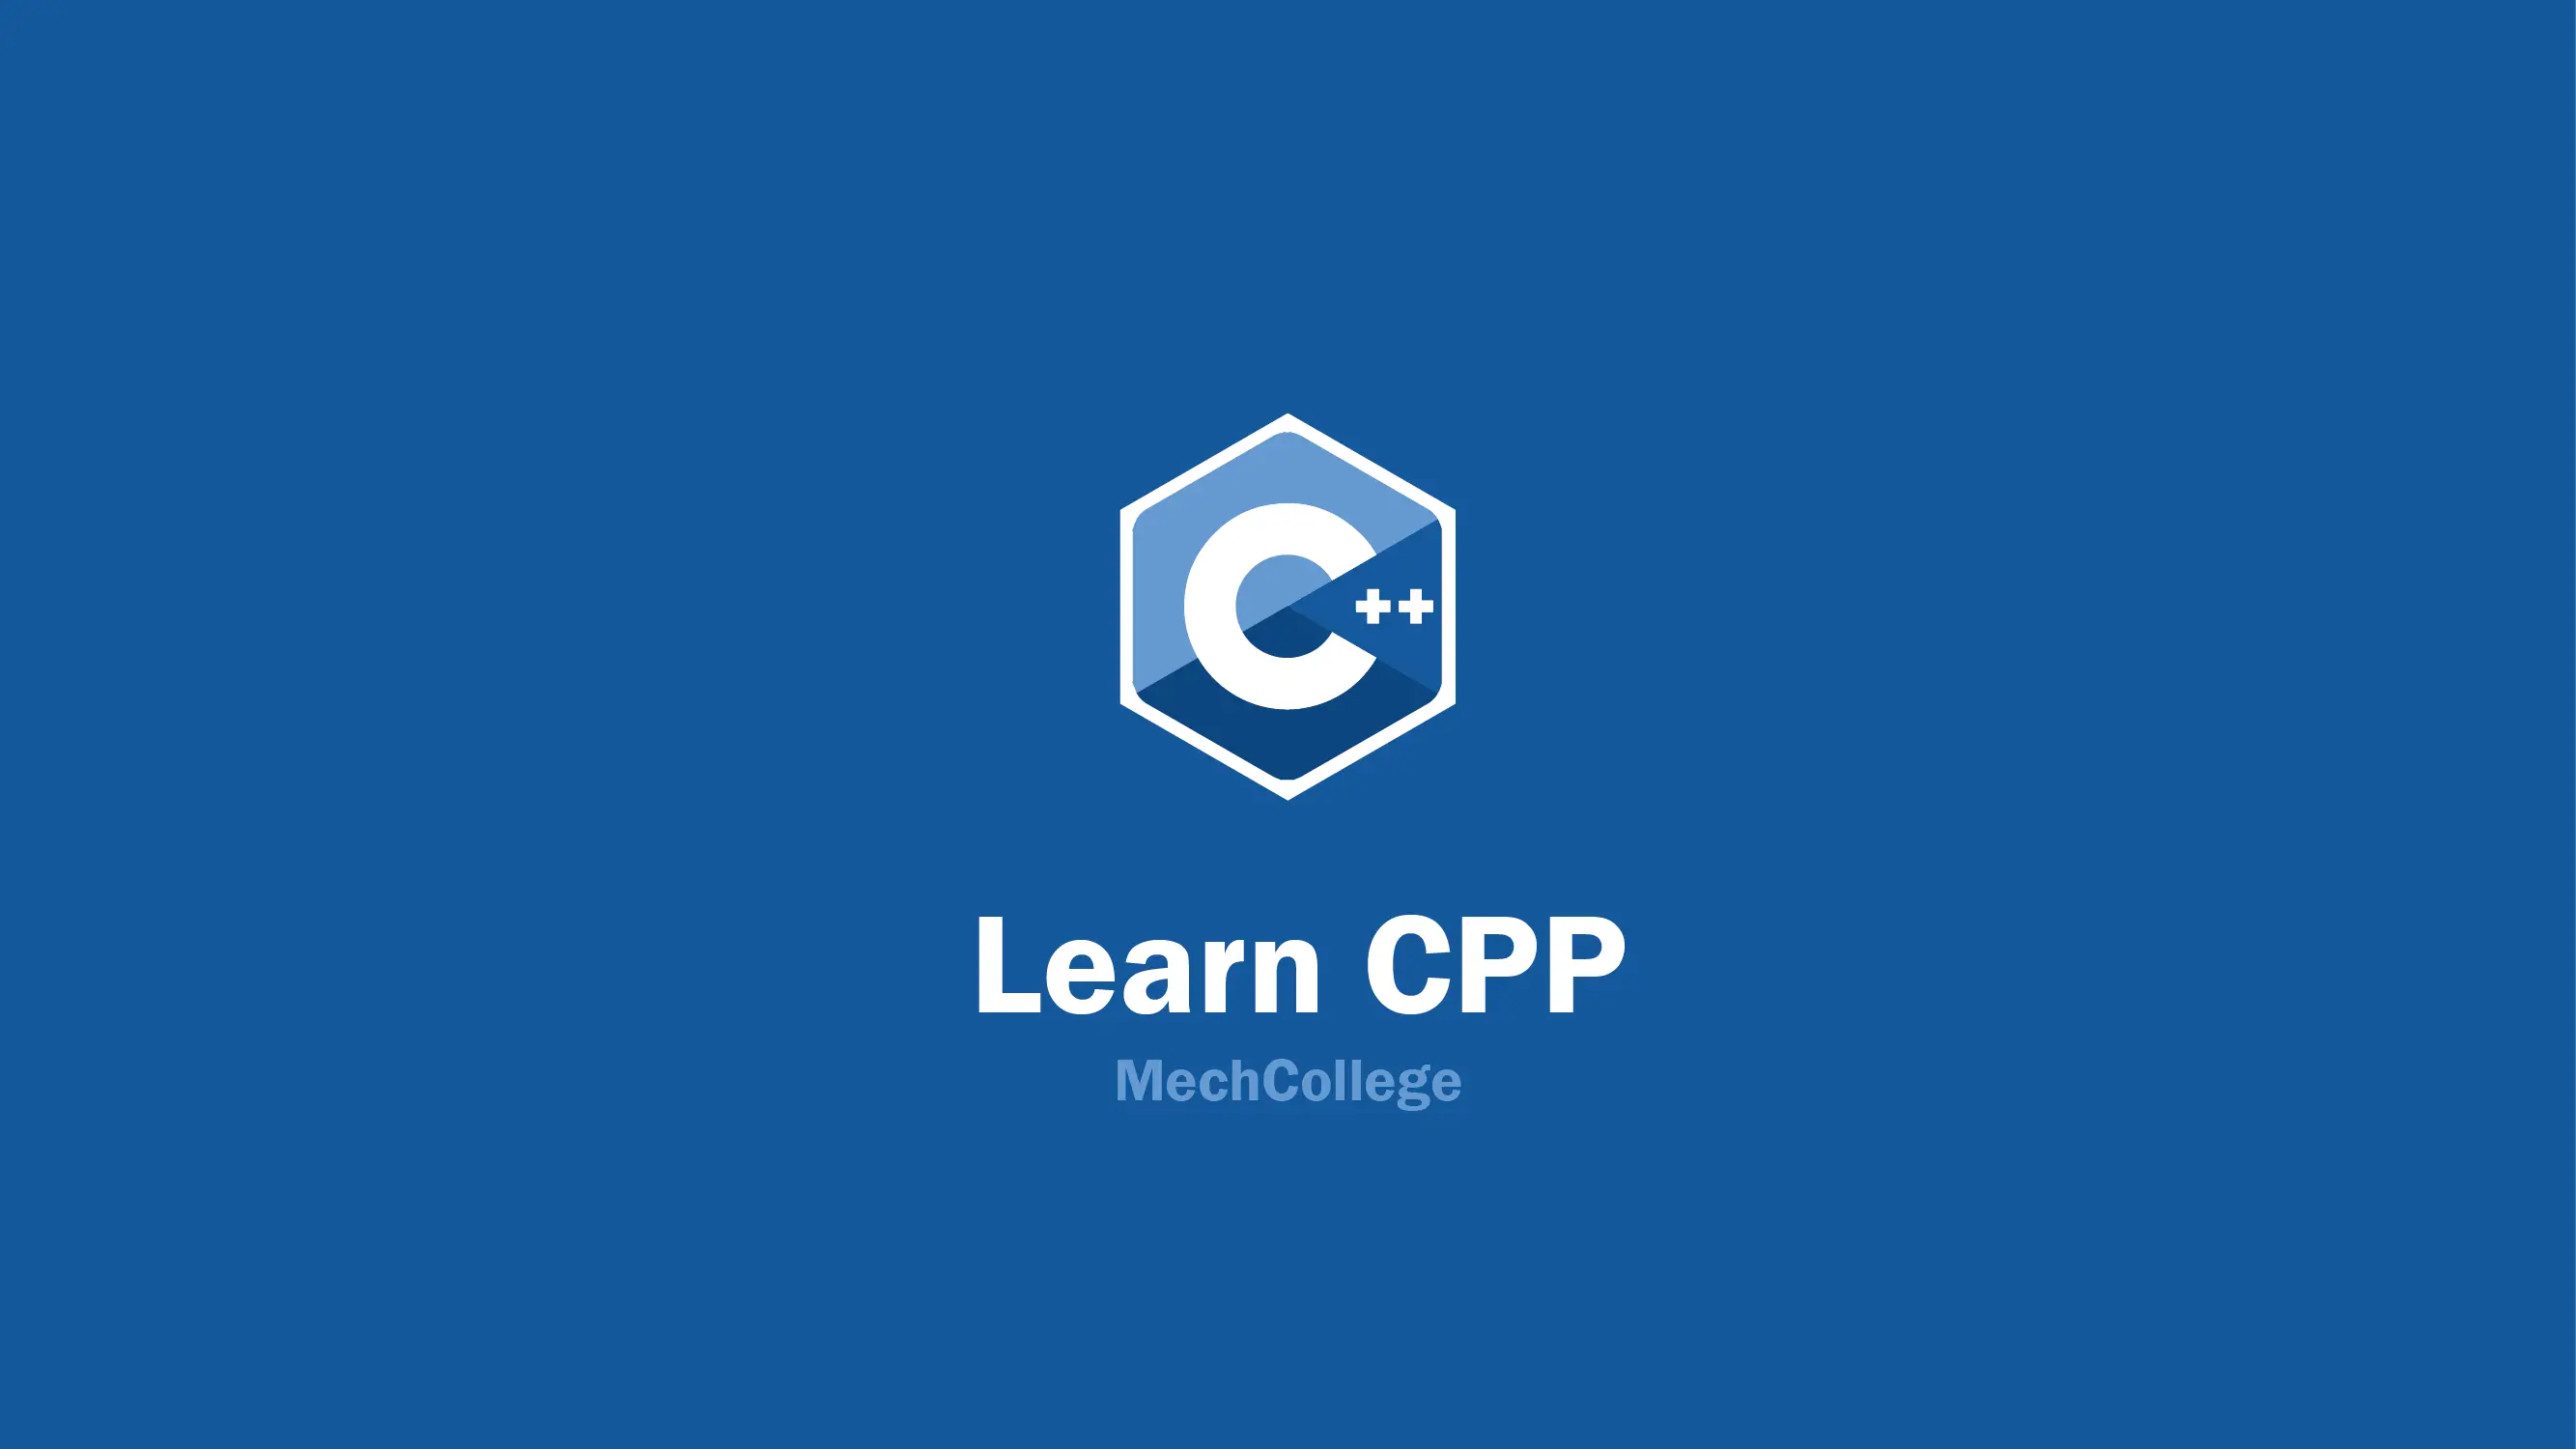 Learn CPP